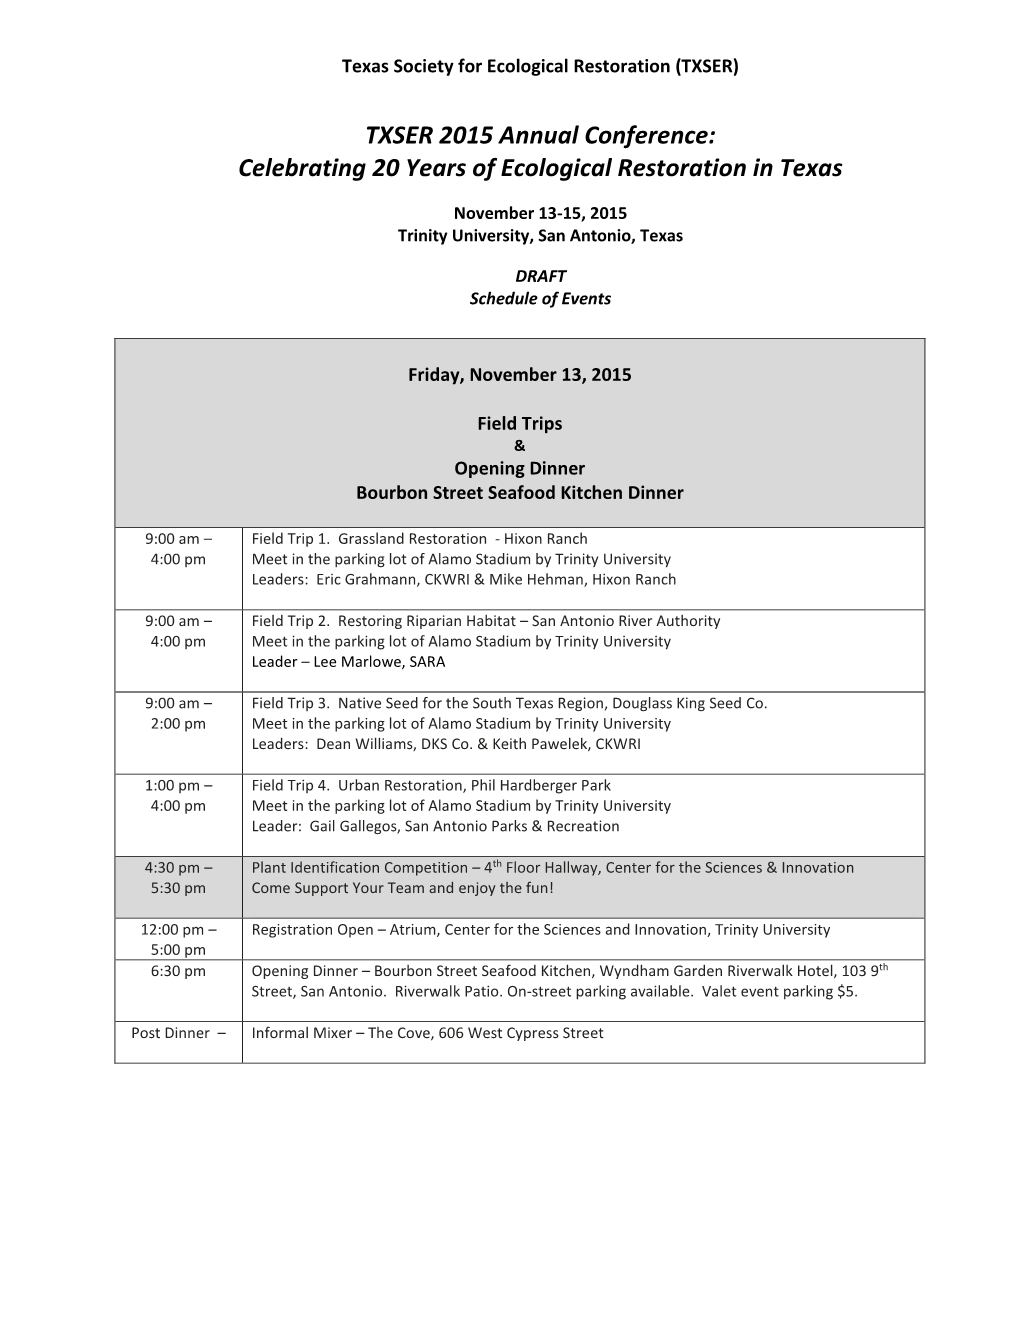 TXSER 2015 Annual Conference: Celebrating 20 Years of Ecological Restoration in Texas